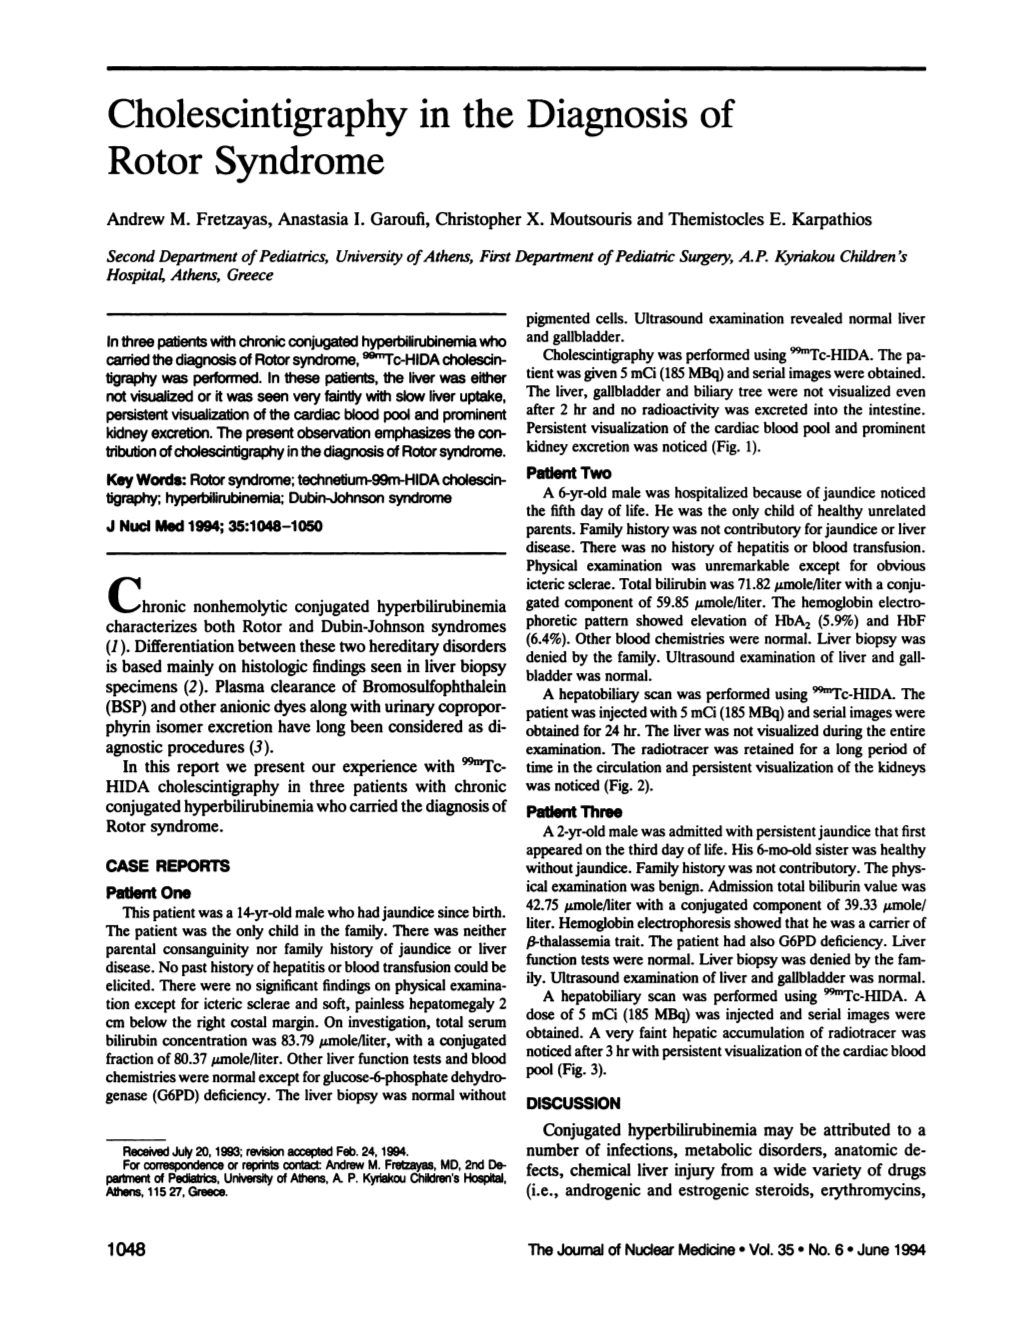 Cholescintigraphy in the Diagnosis of Rotor Syndrome